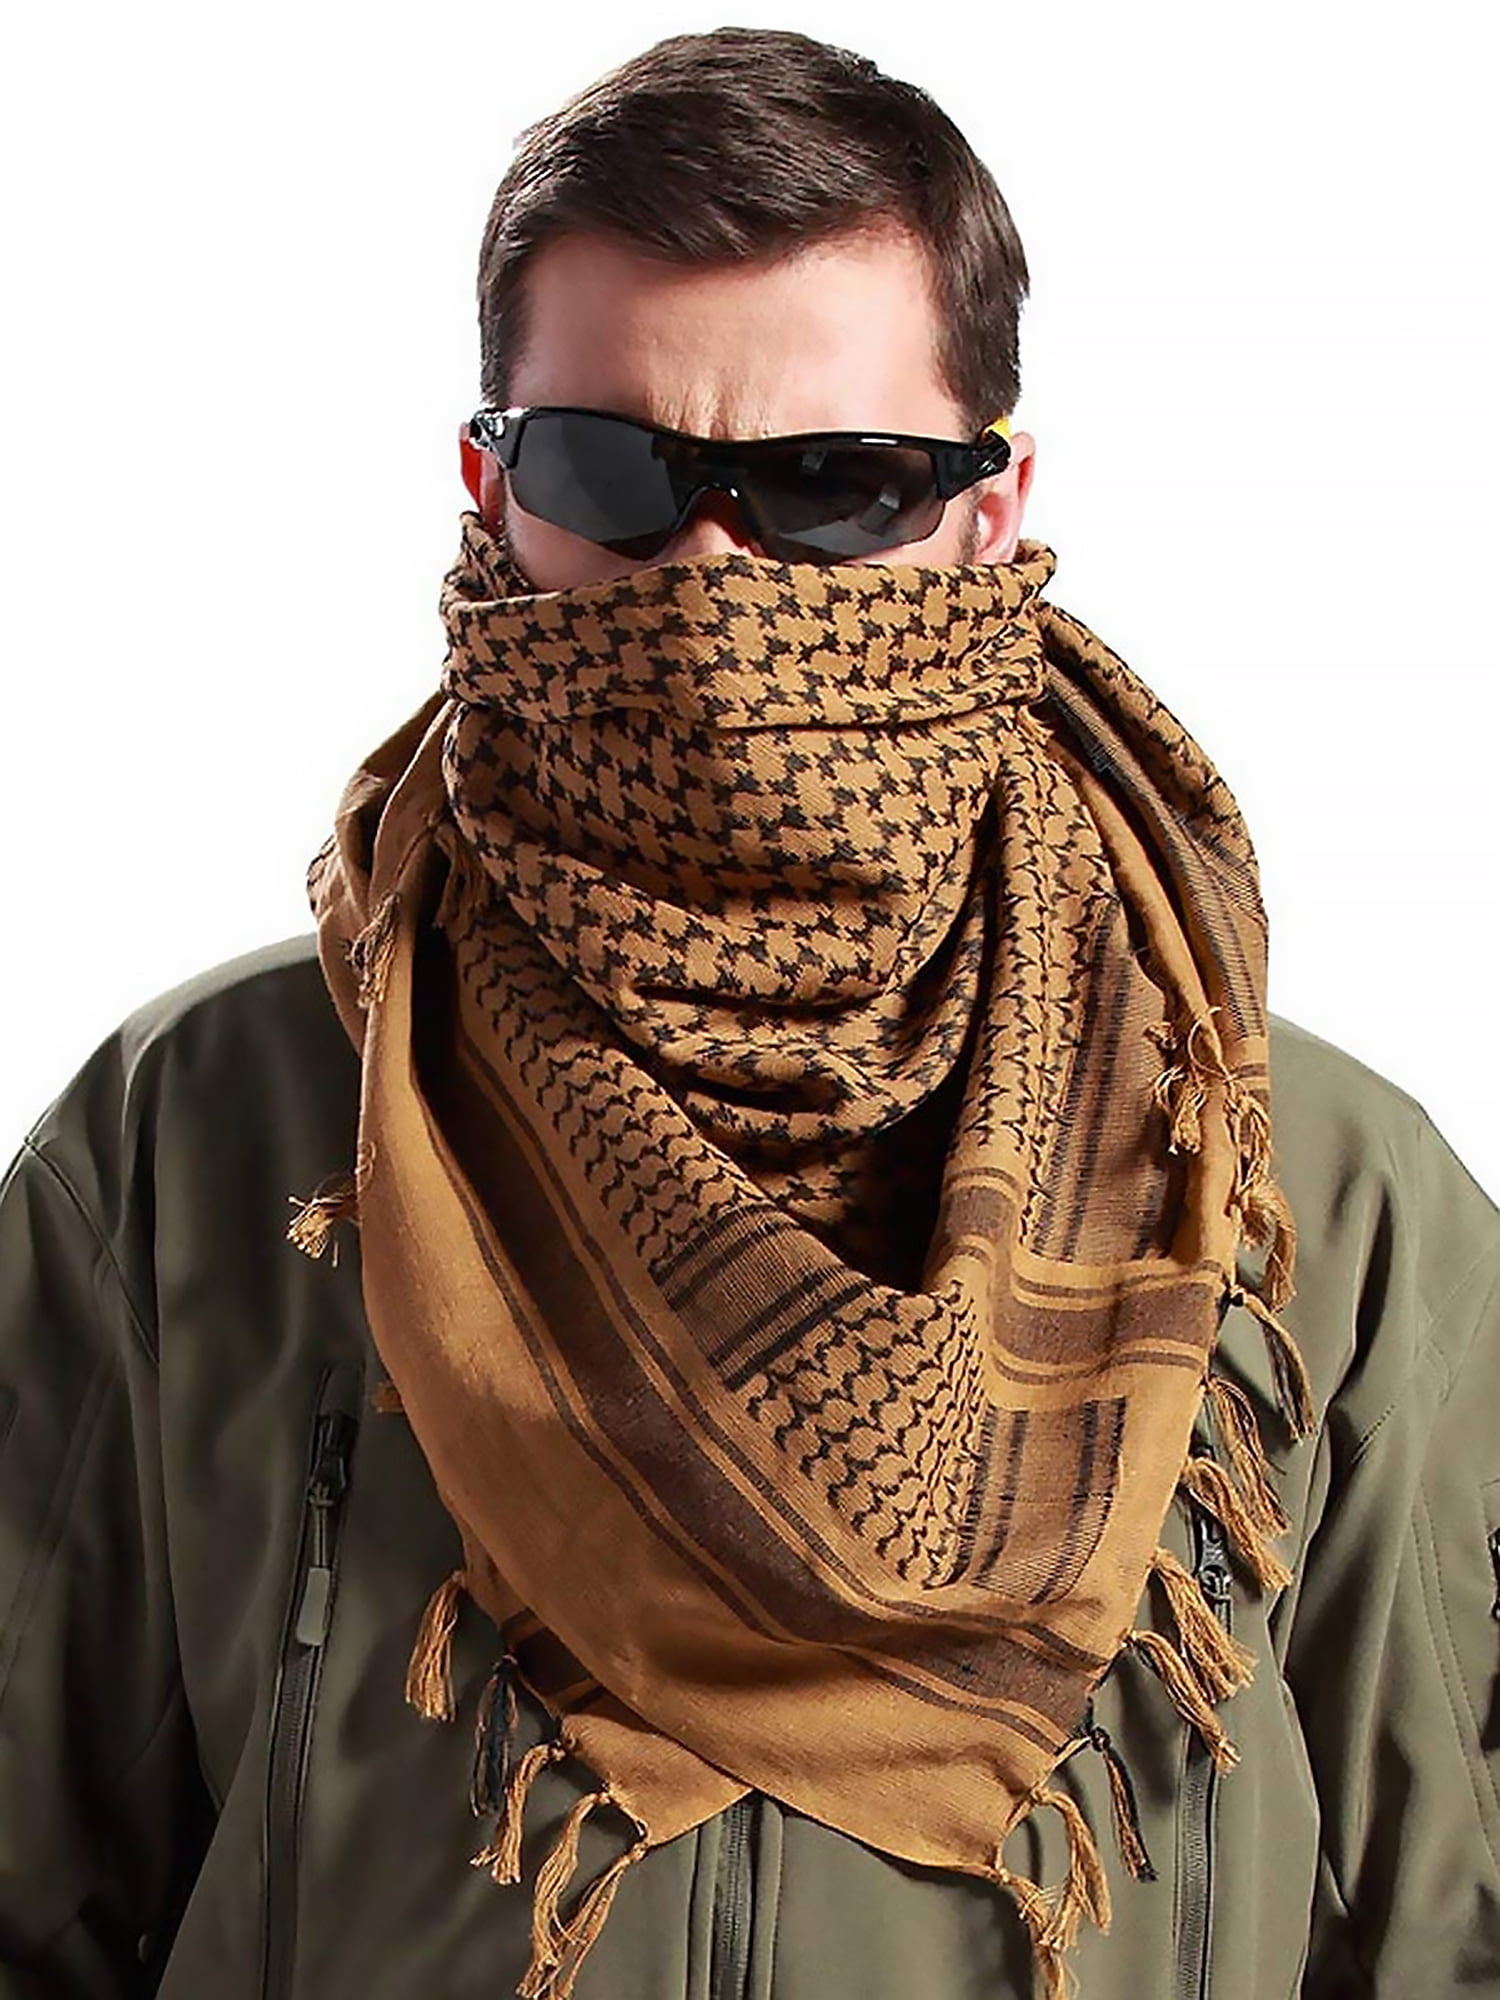 Tactical Shemagh Army Scarf Military Shermag Head Wrap Patrol Keffiyeh White Red by Mil-Tec 